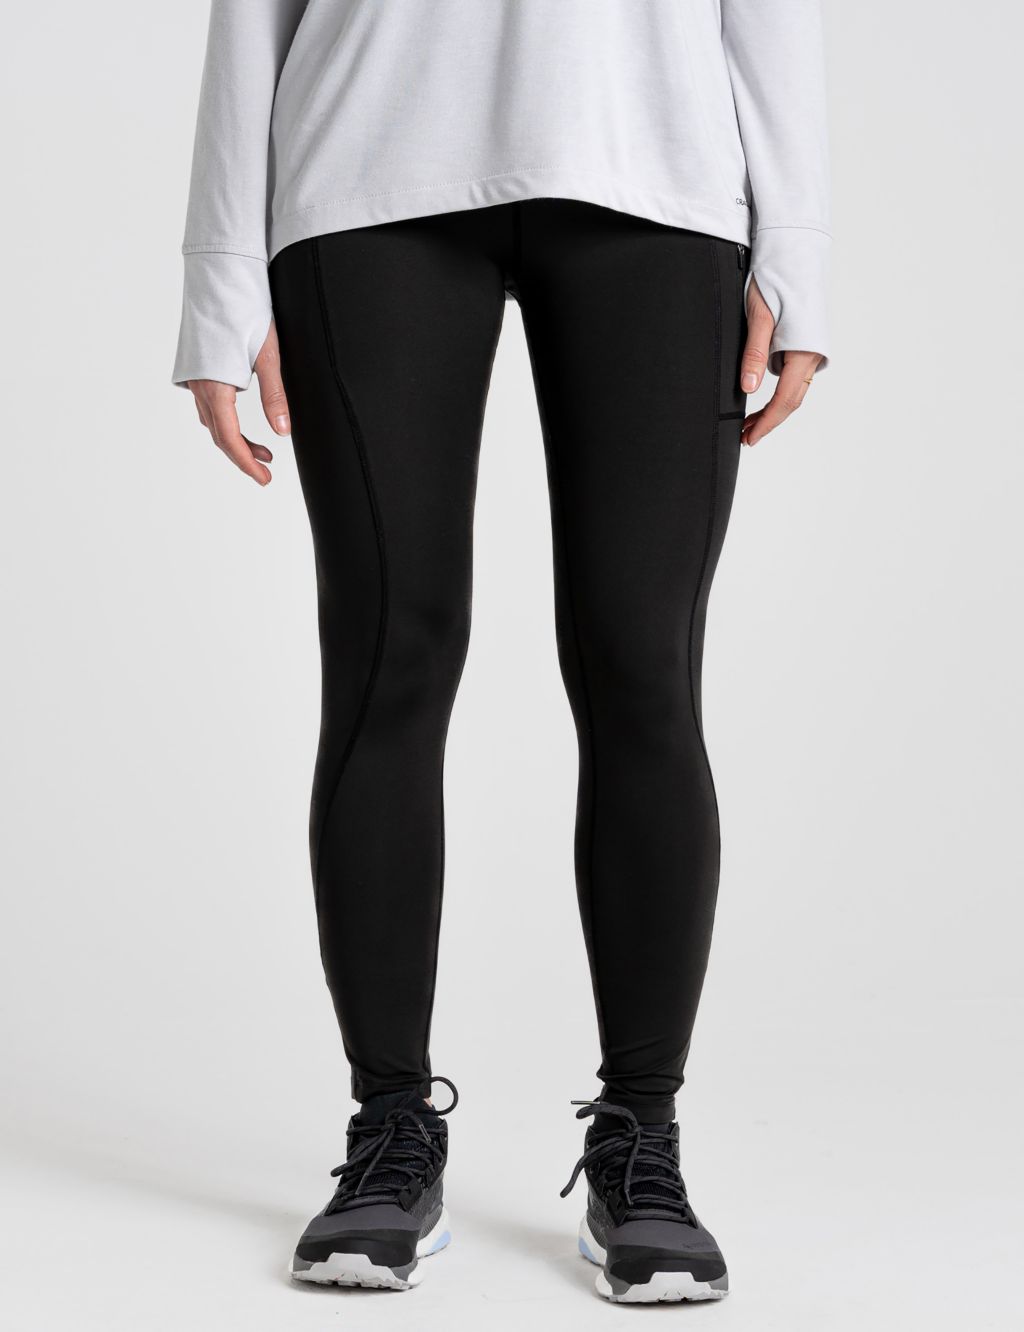 Page 2 - Women's Skinny Fit Trousers